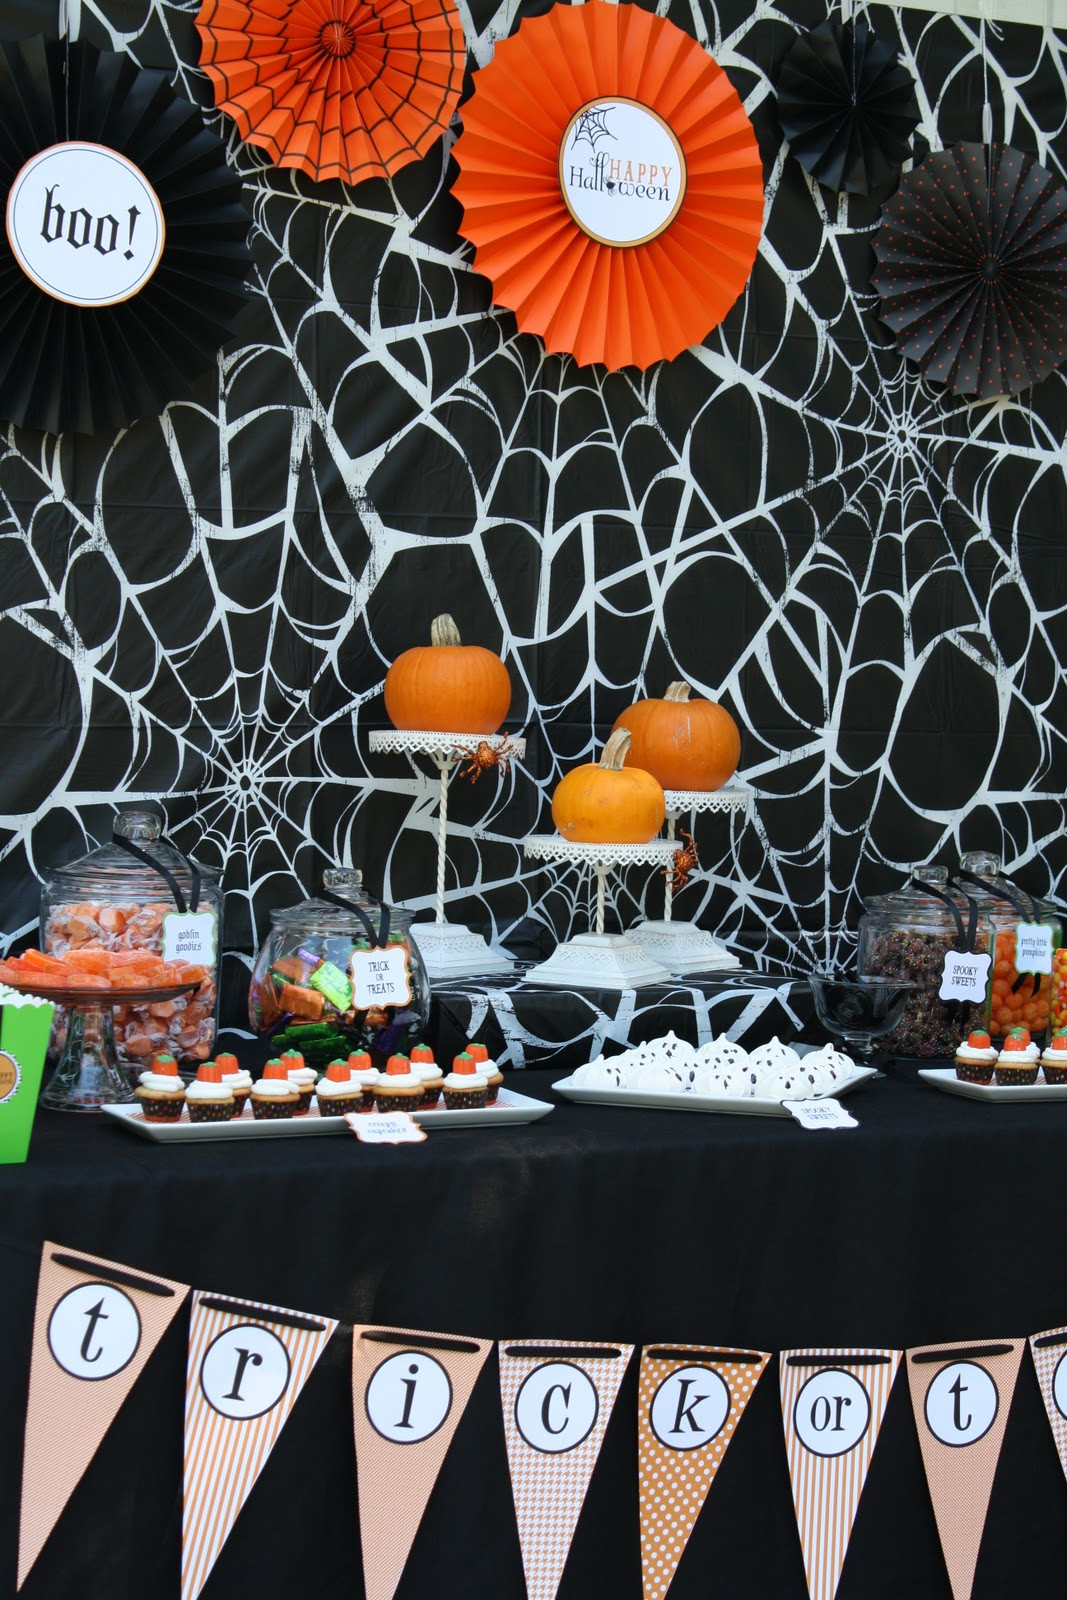 Halloween Party Decorations Ideas
 A Halloween Pumpkin Carving Party Anders Ruff Custom